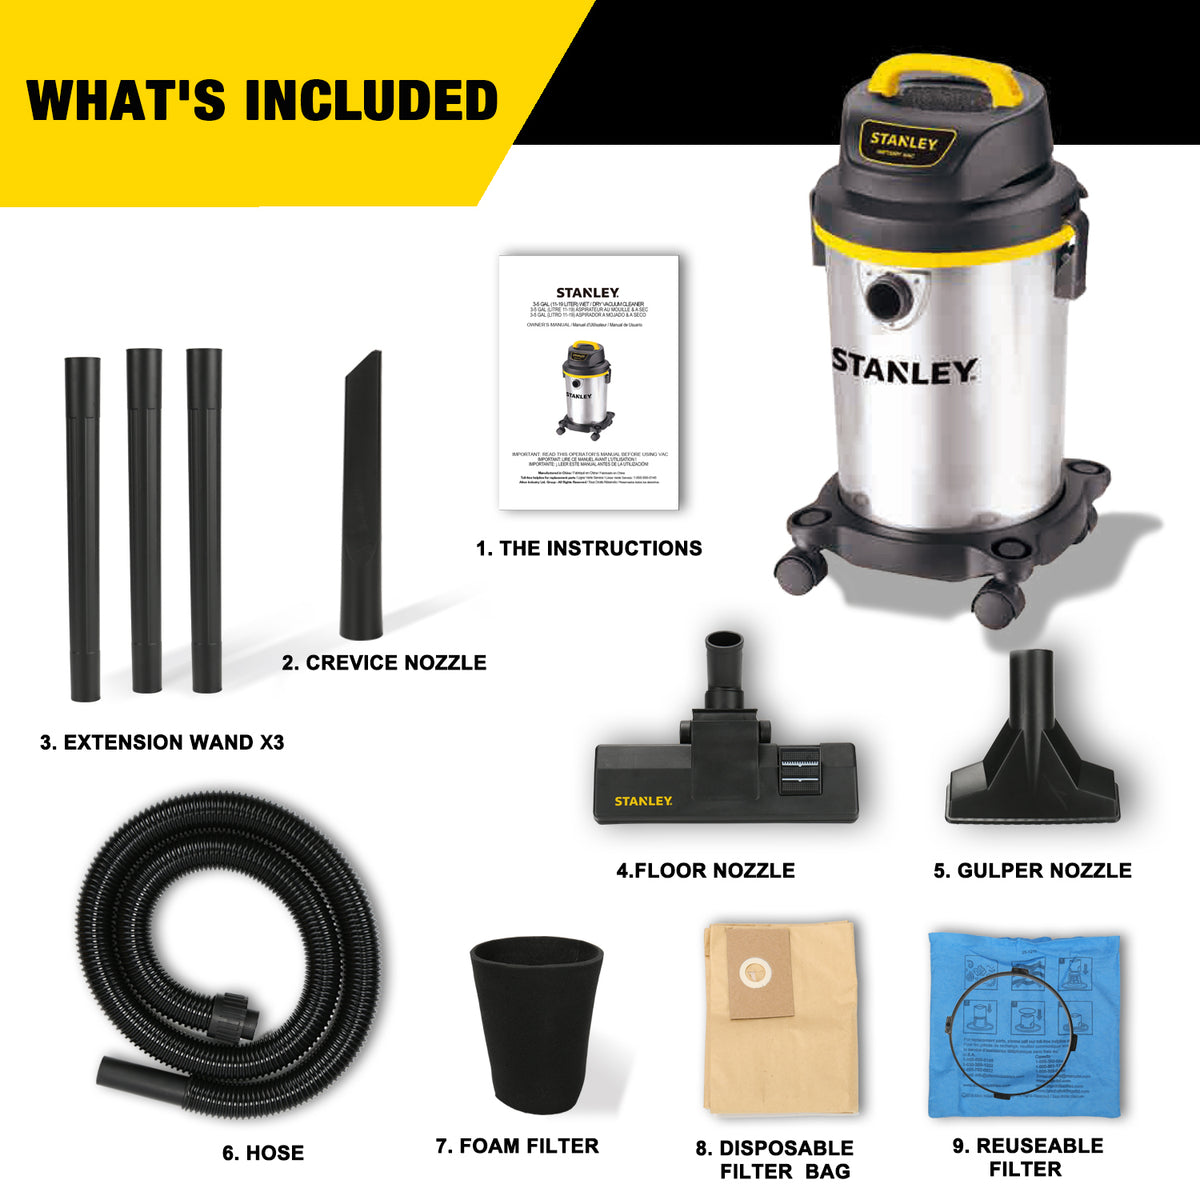 SL18129 Stanley 4 Gallon Stainless Steel Wet/Dry Vac